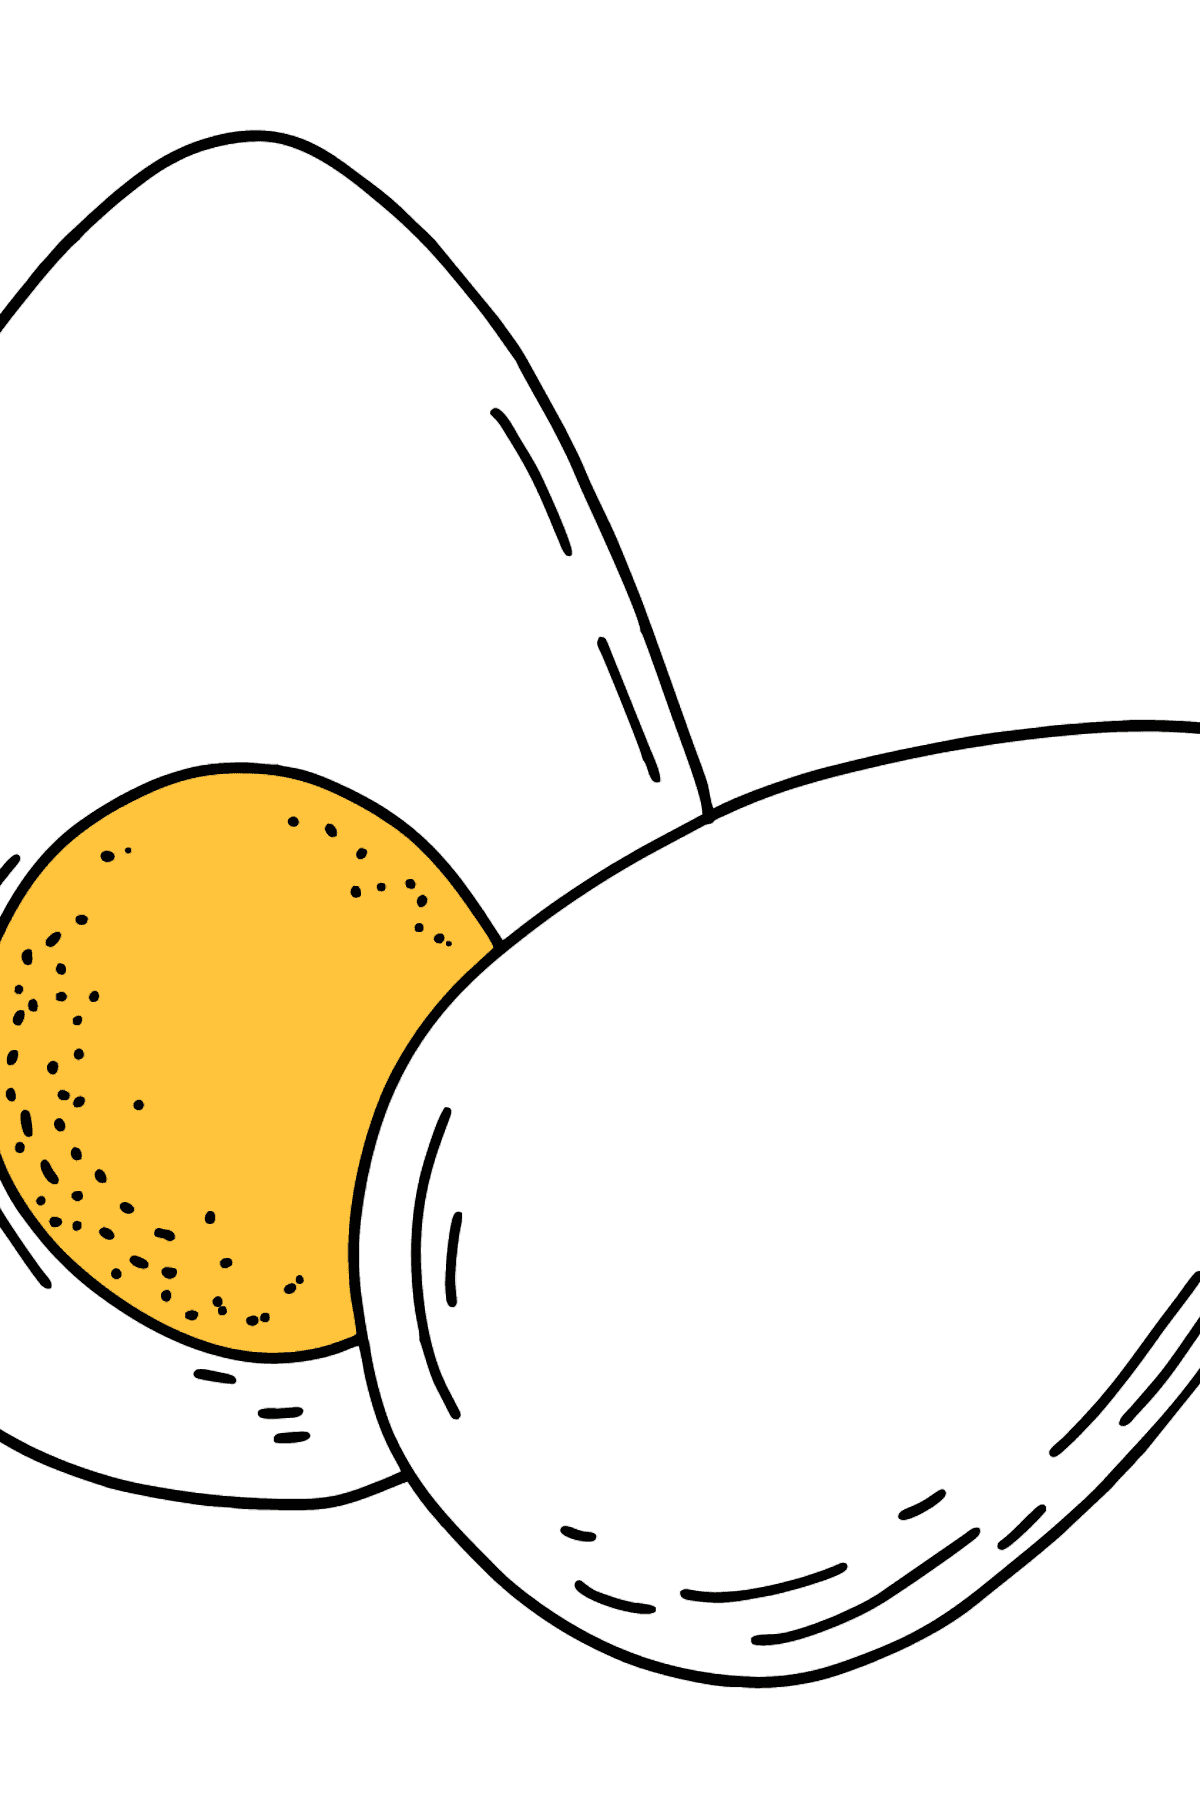 Hard-Boiled Eggs coloring page - Coloring Pages for Kids